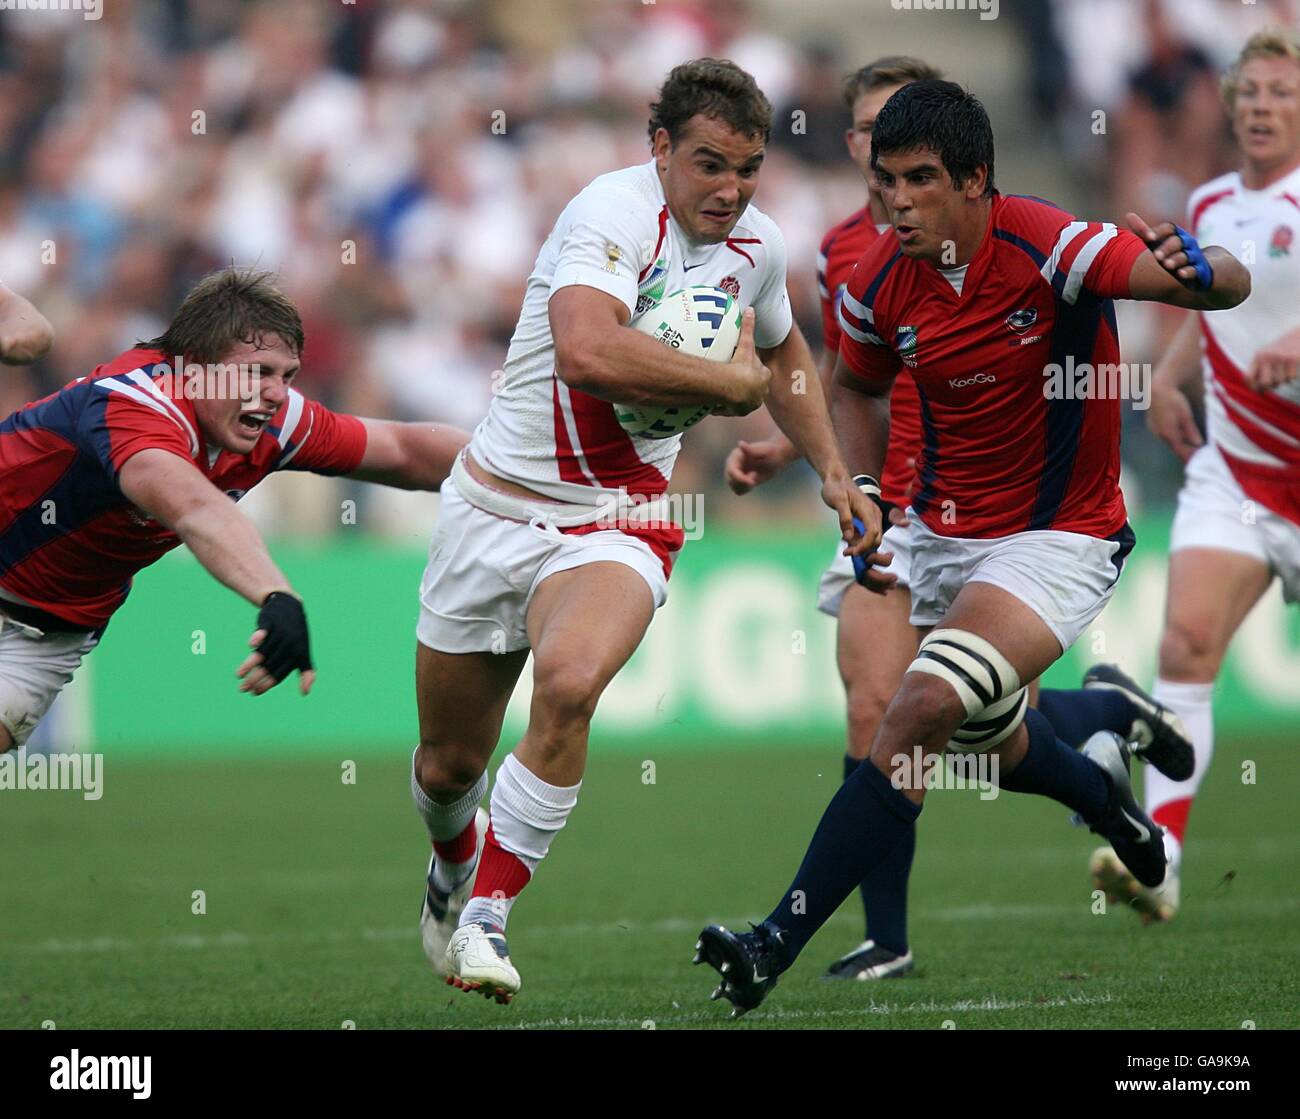 Rugby Union - IRB Rugby World Cup 2007 - Pool A - England v USA - Stade Felix Bollaert. England's Olly Barkley attempts to avoid the tackles from two USA players Stock Photo